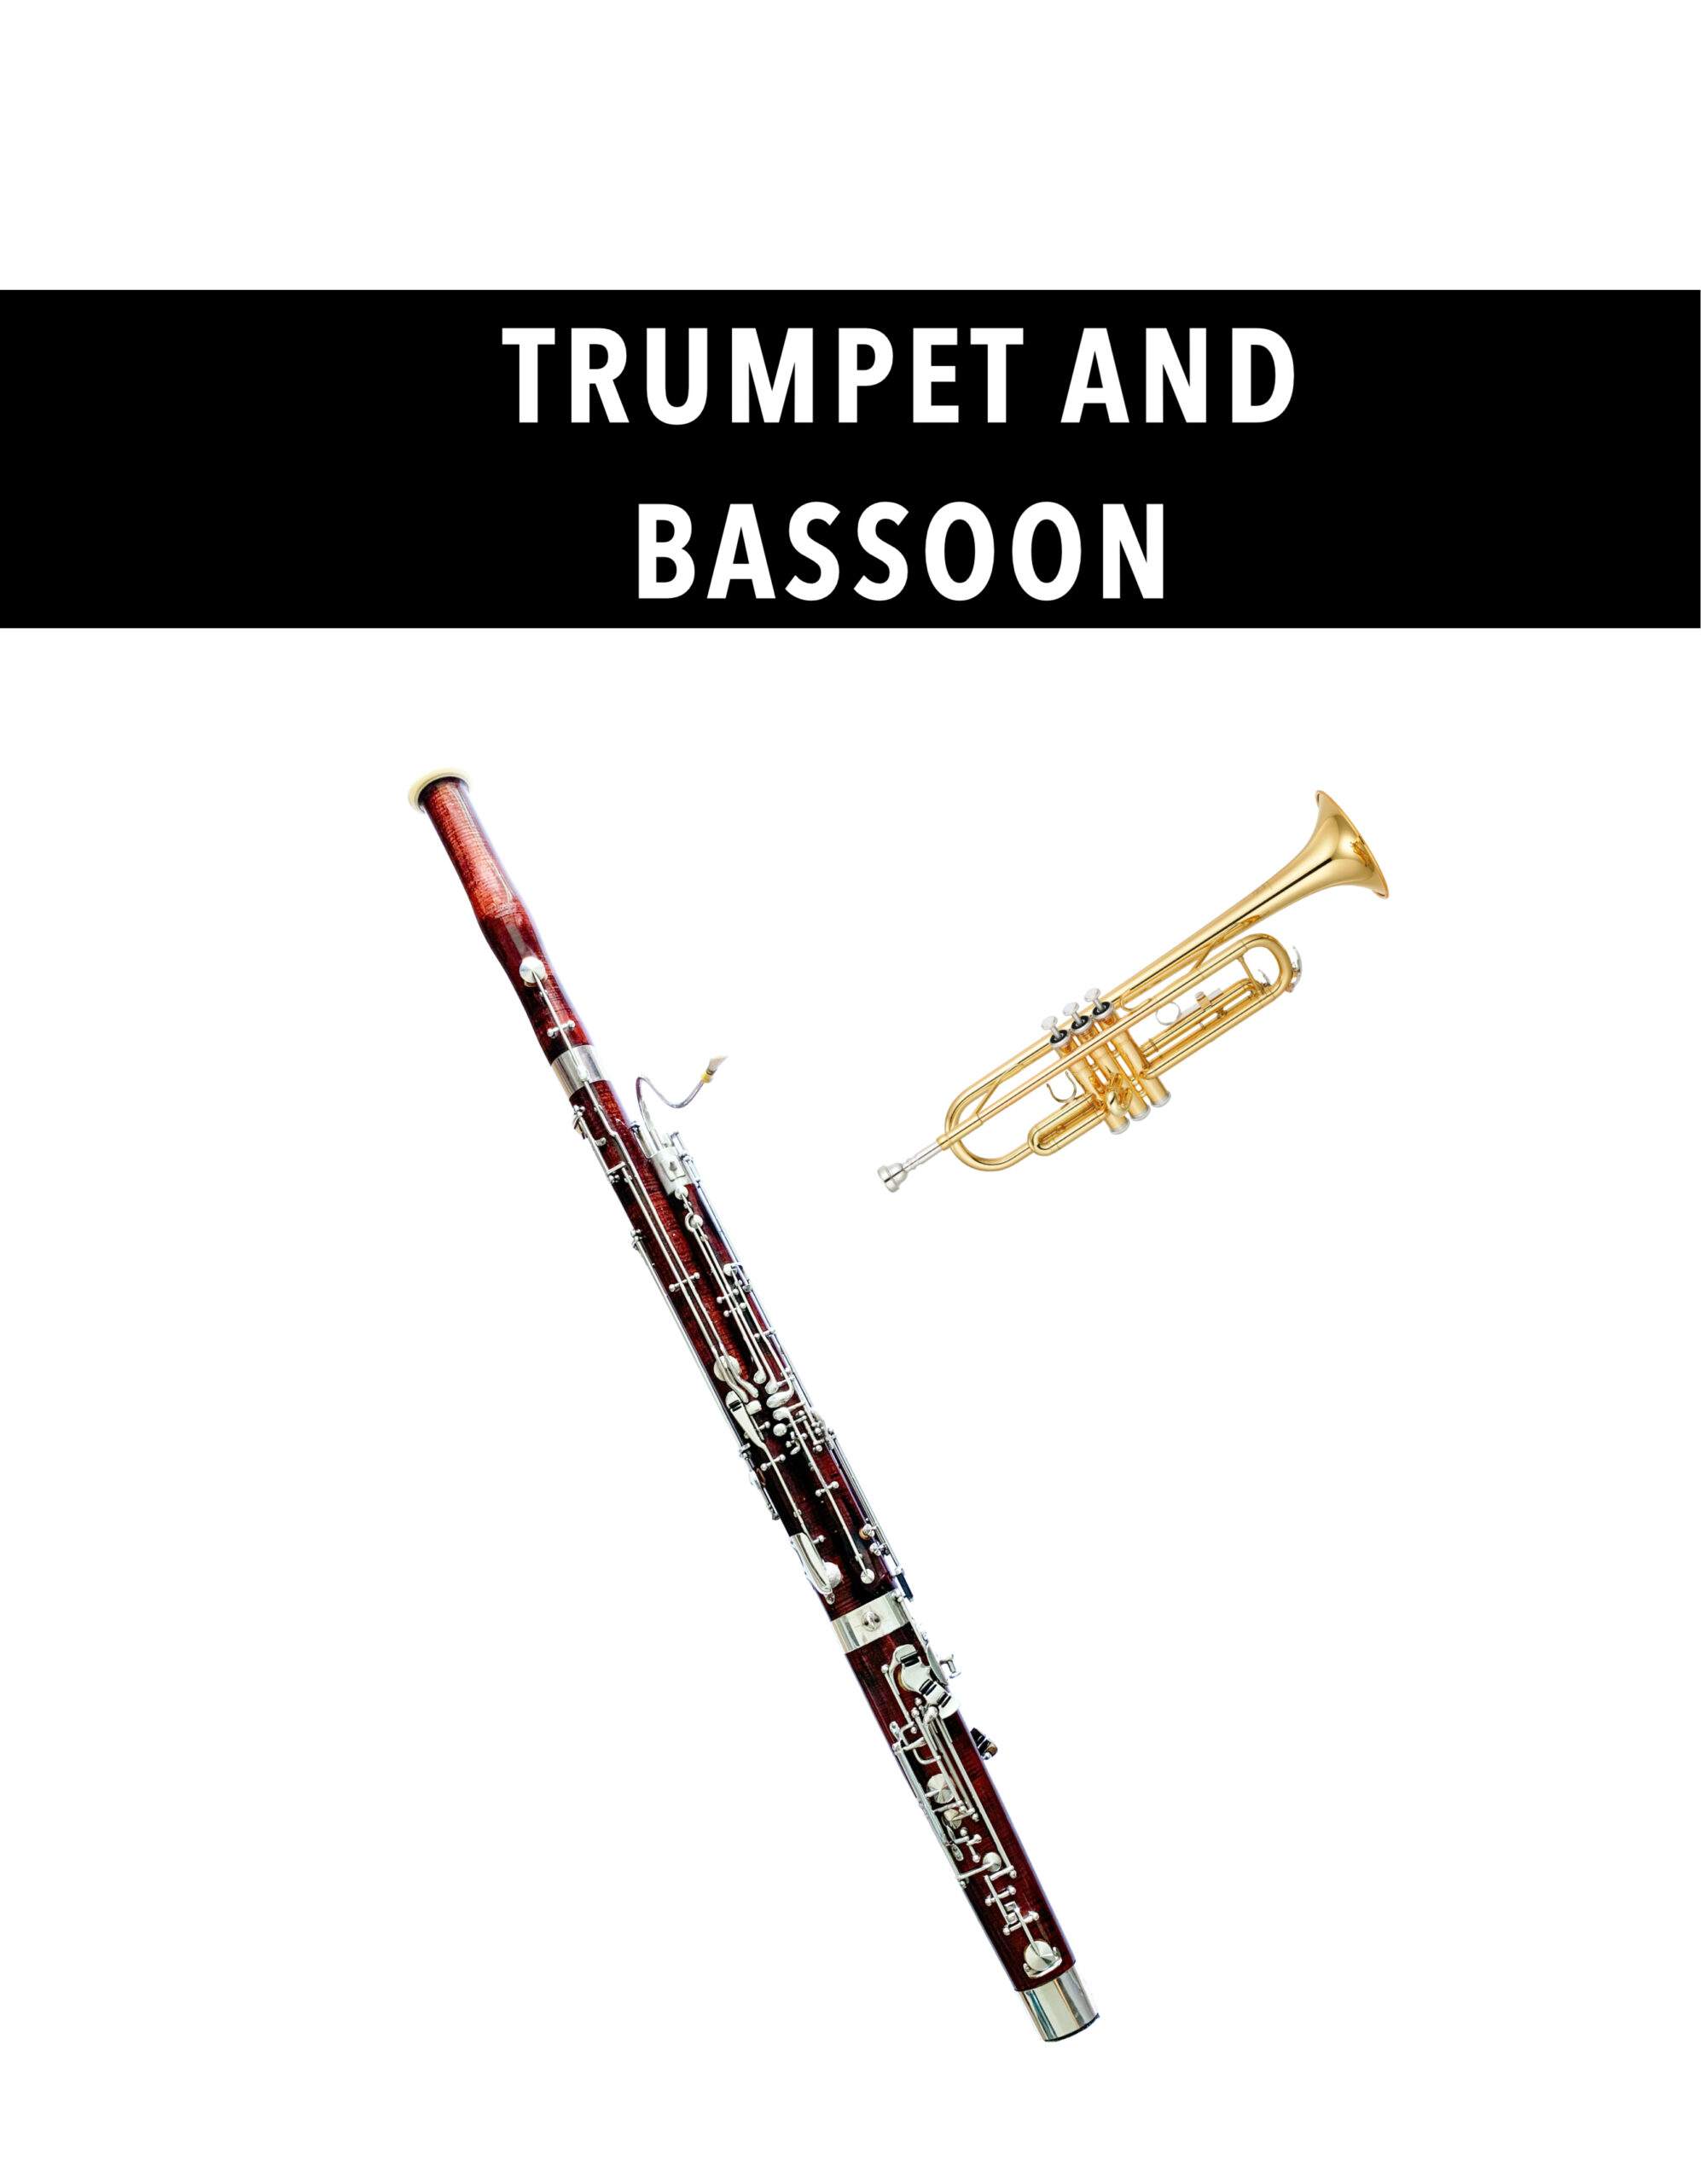 Trumpet and Bassoon